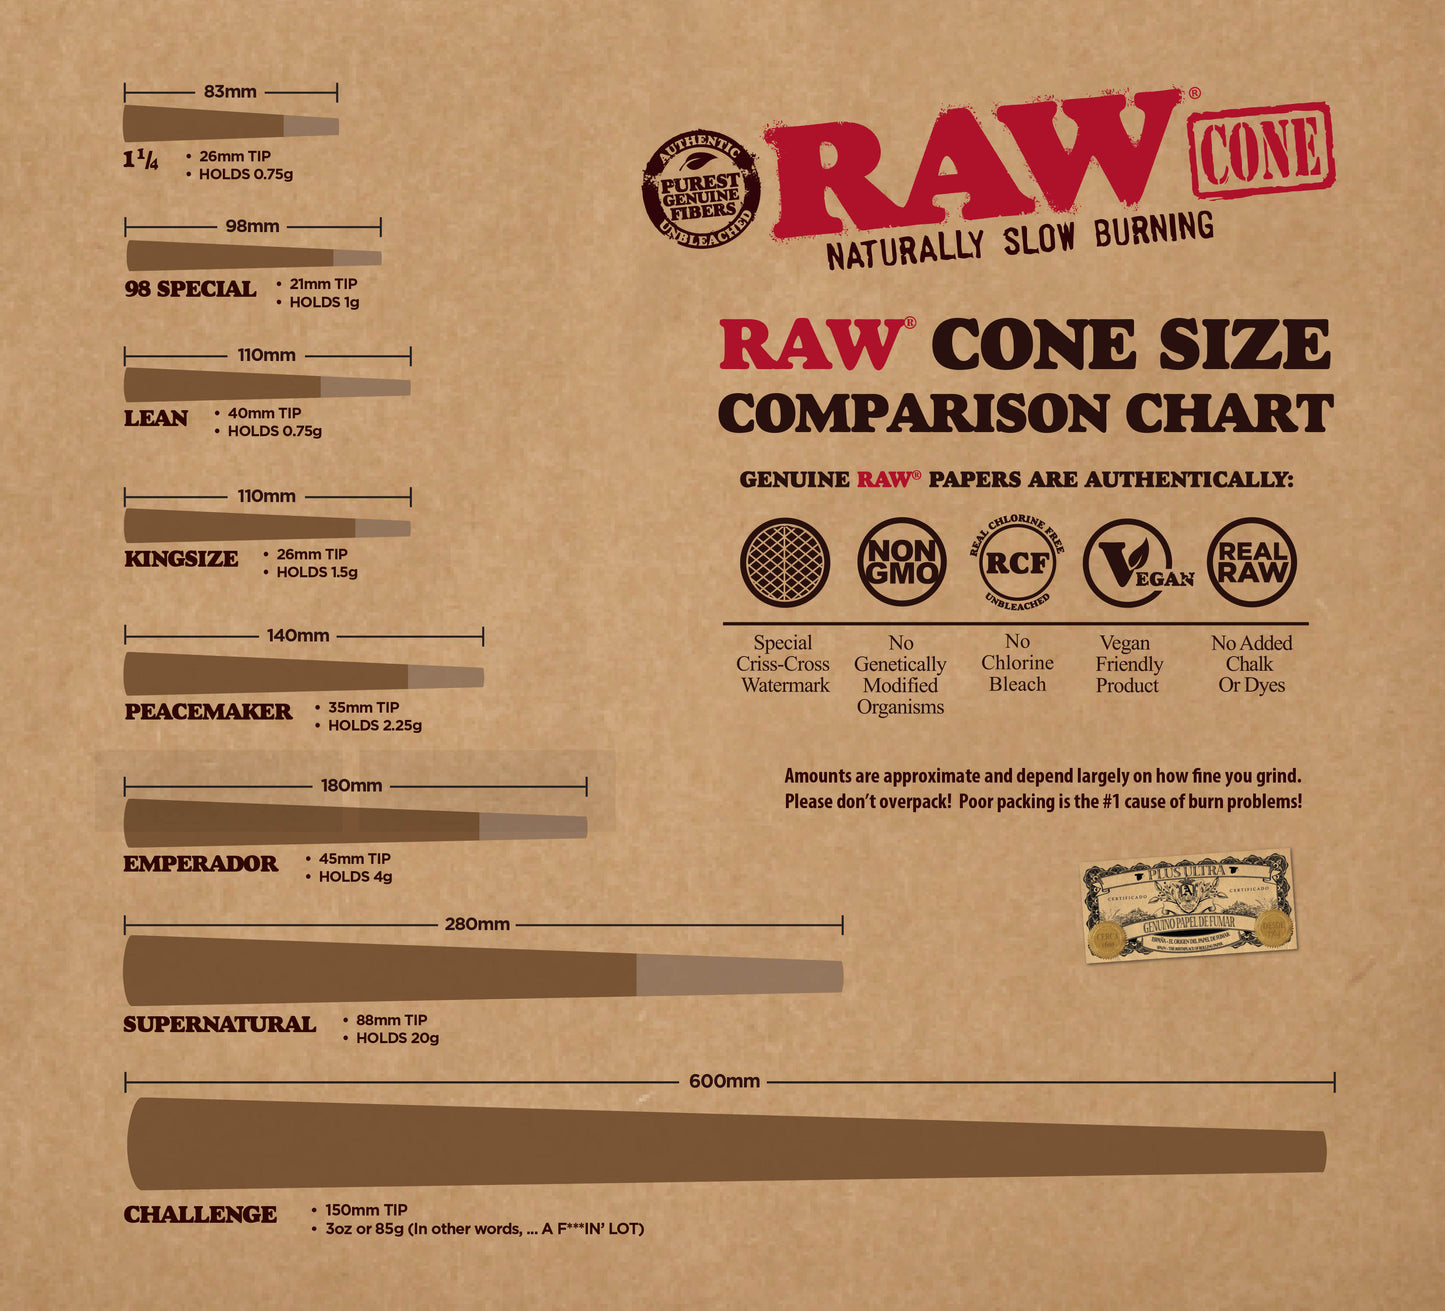 RAW Classic King Size Pre-Rolled Cone 800PK